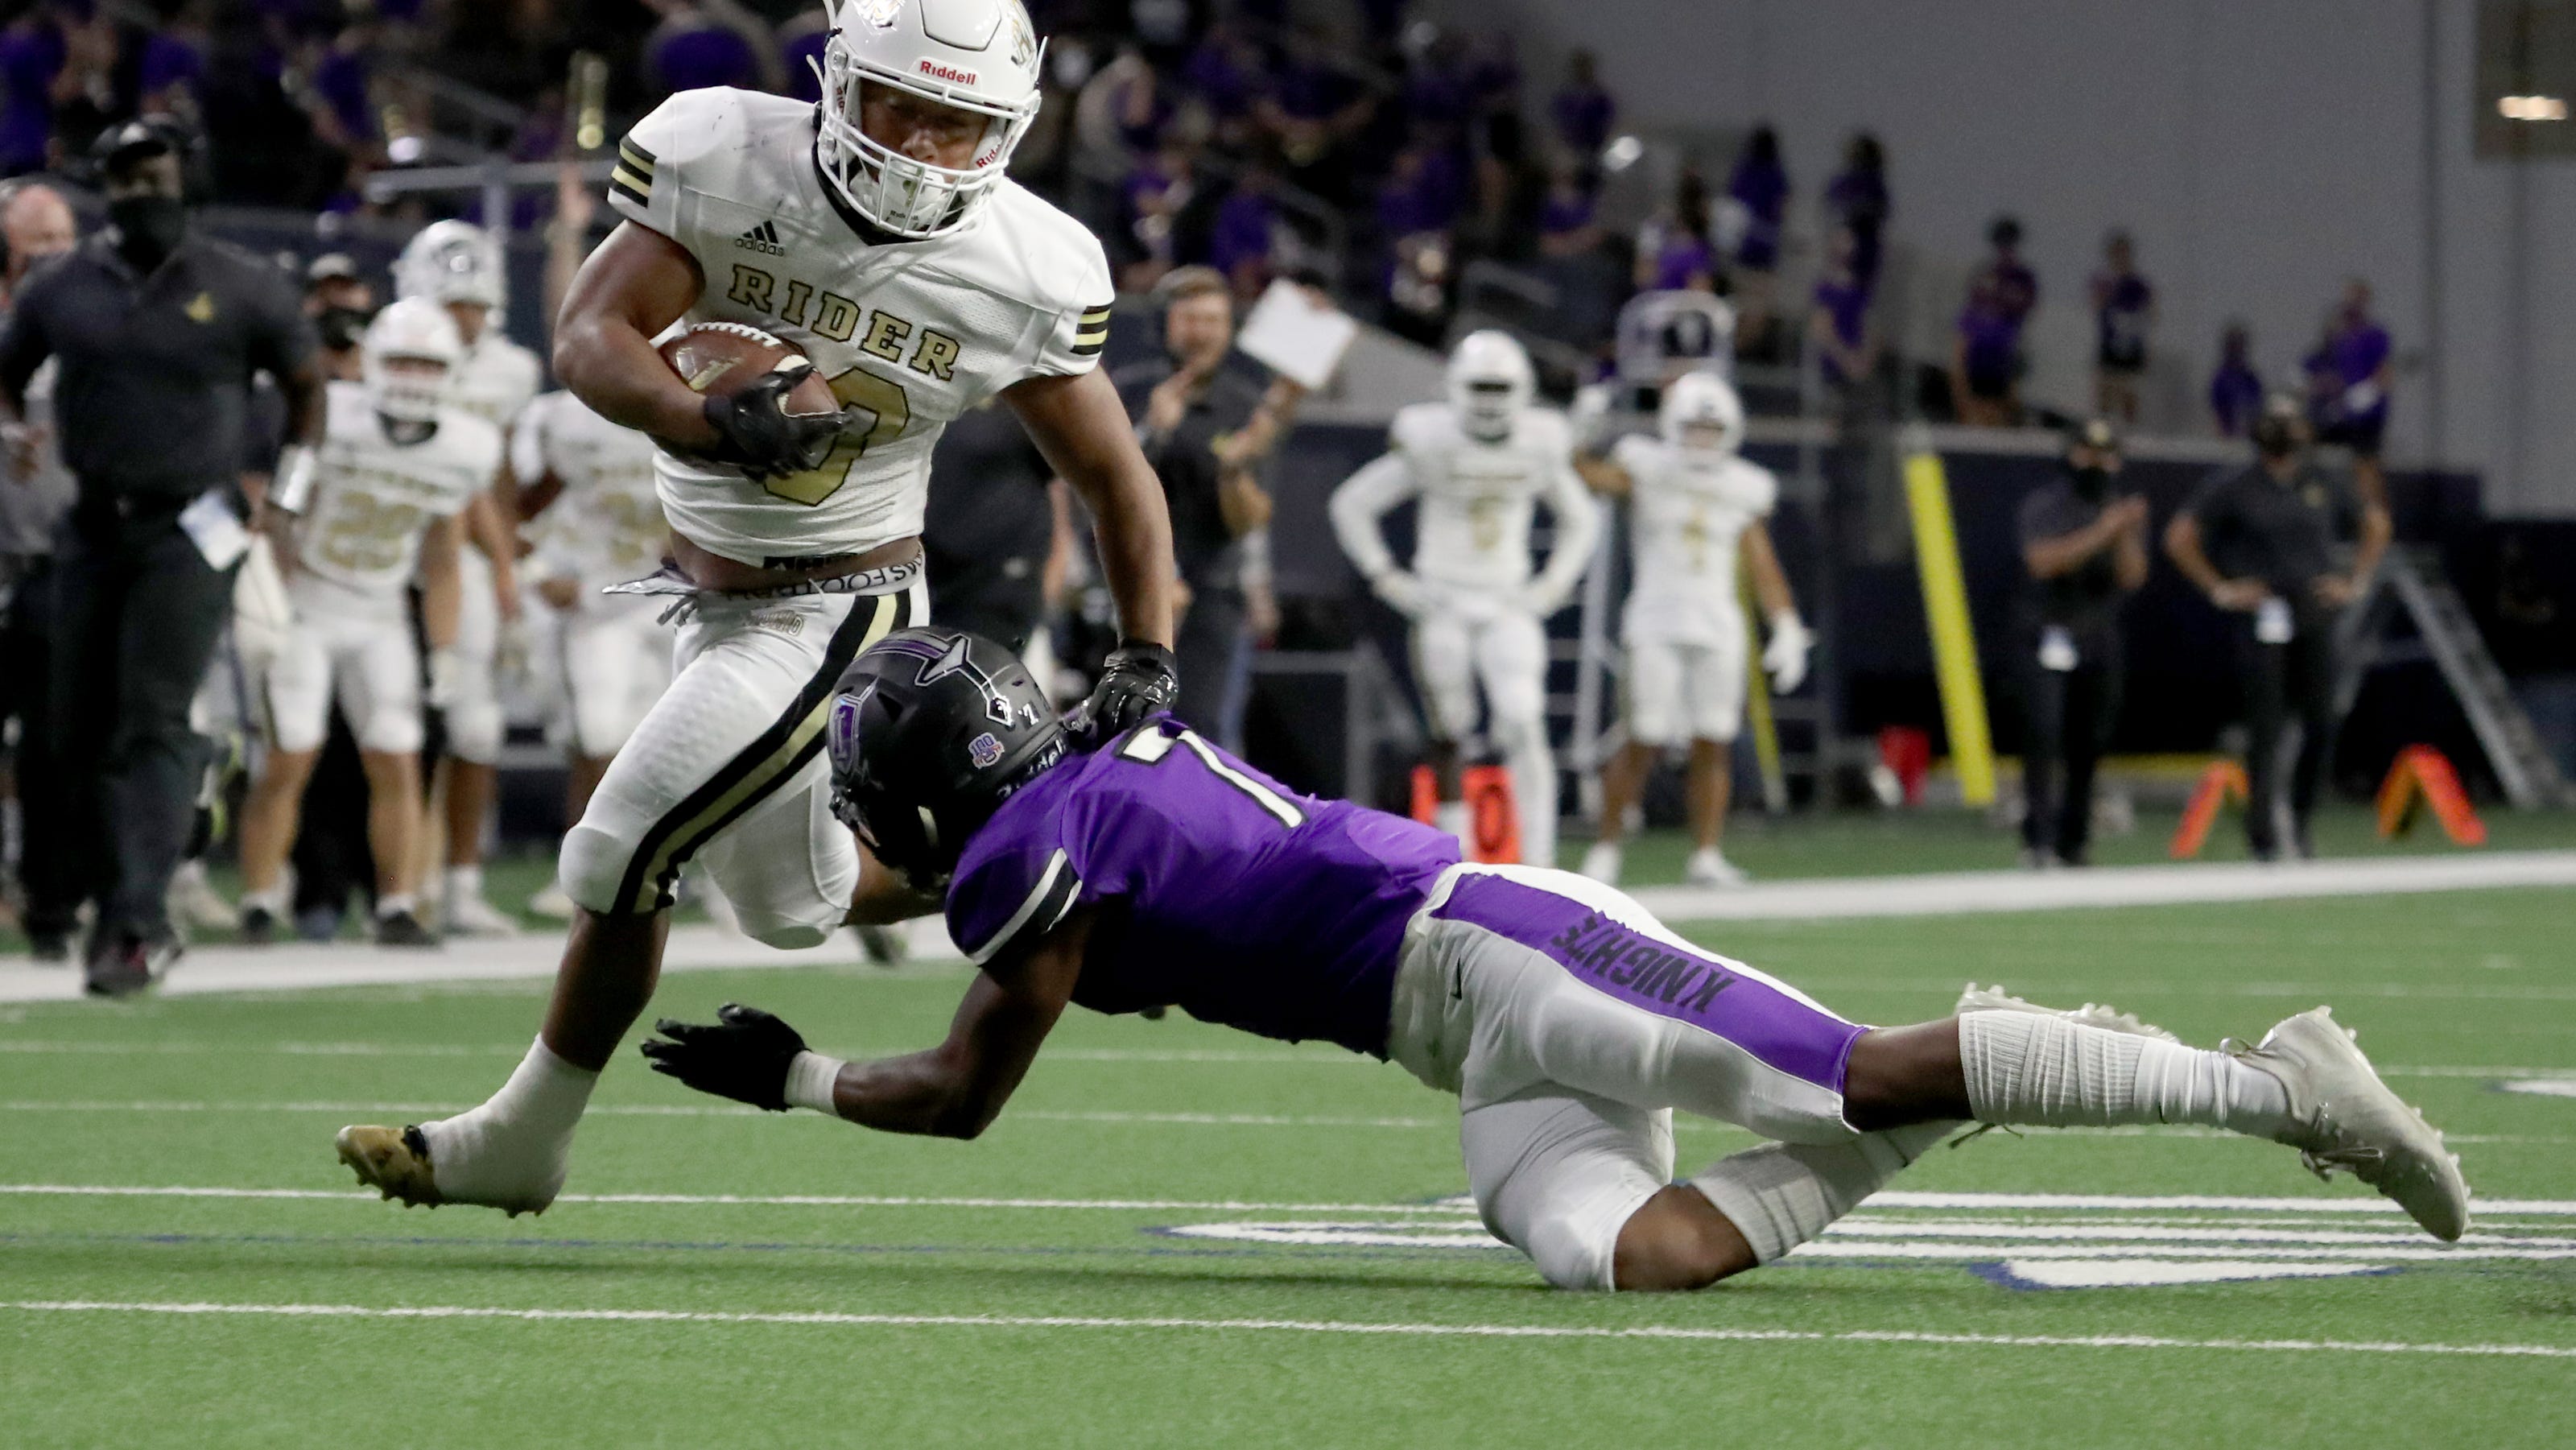 Rider Raiders at Frisco Independence Knights 2020 football score